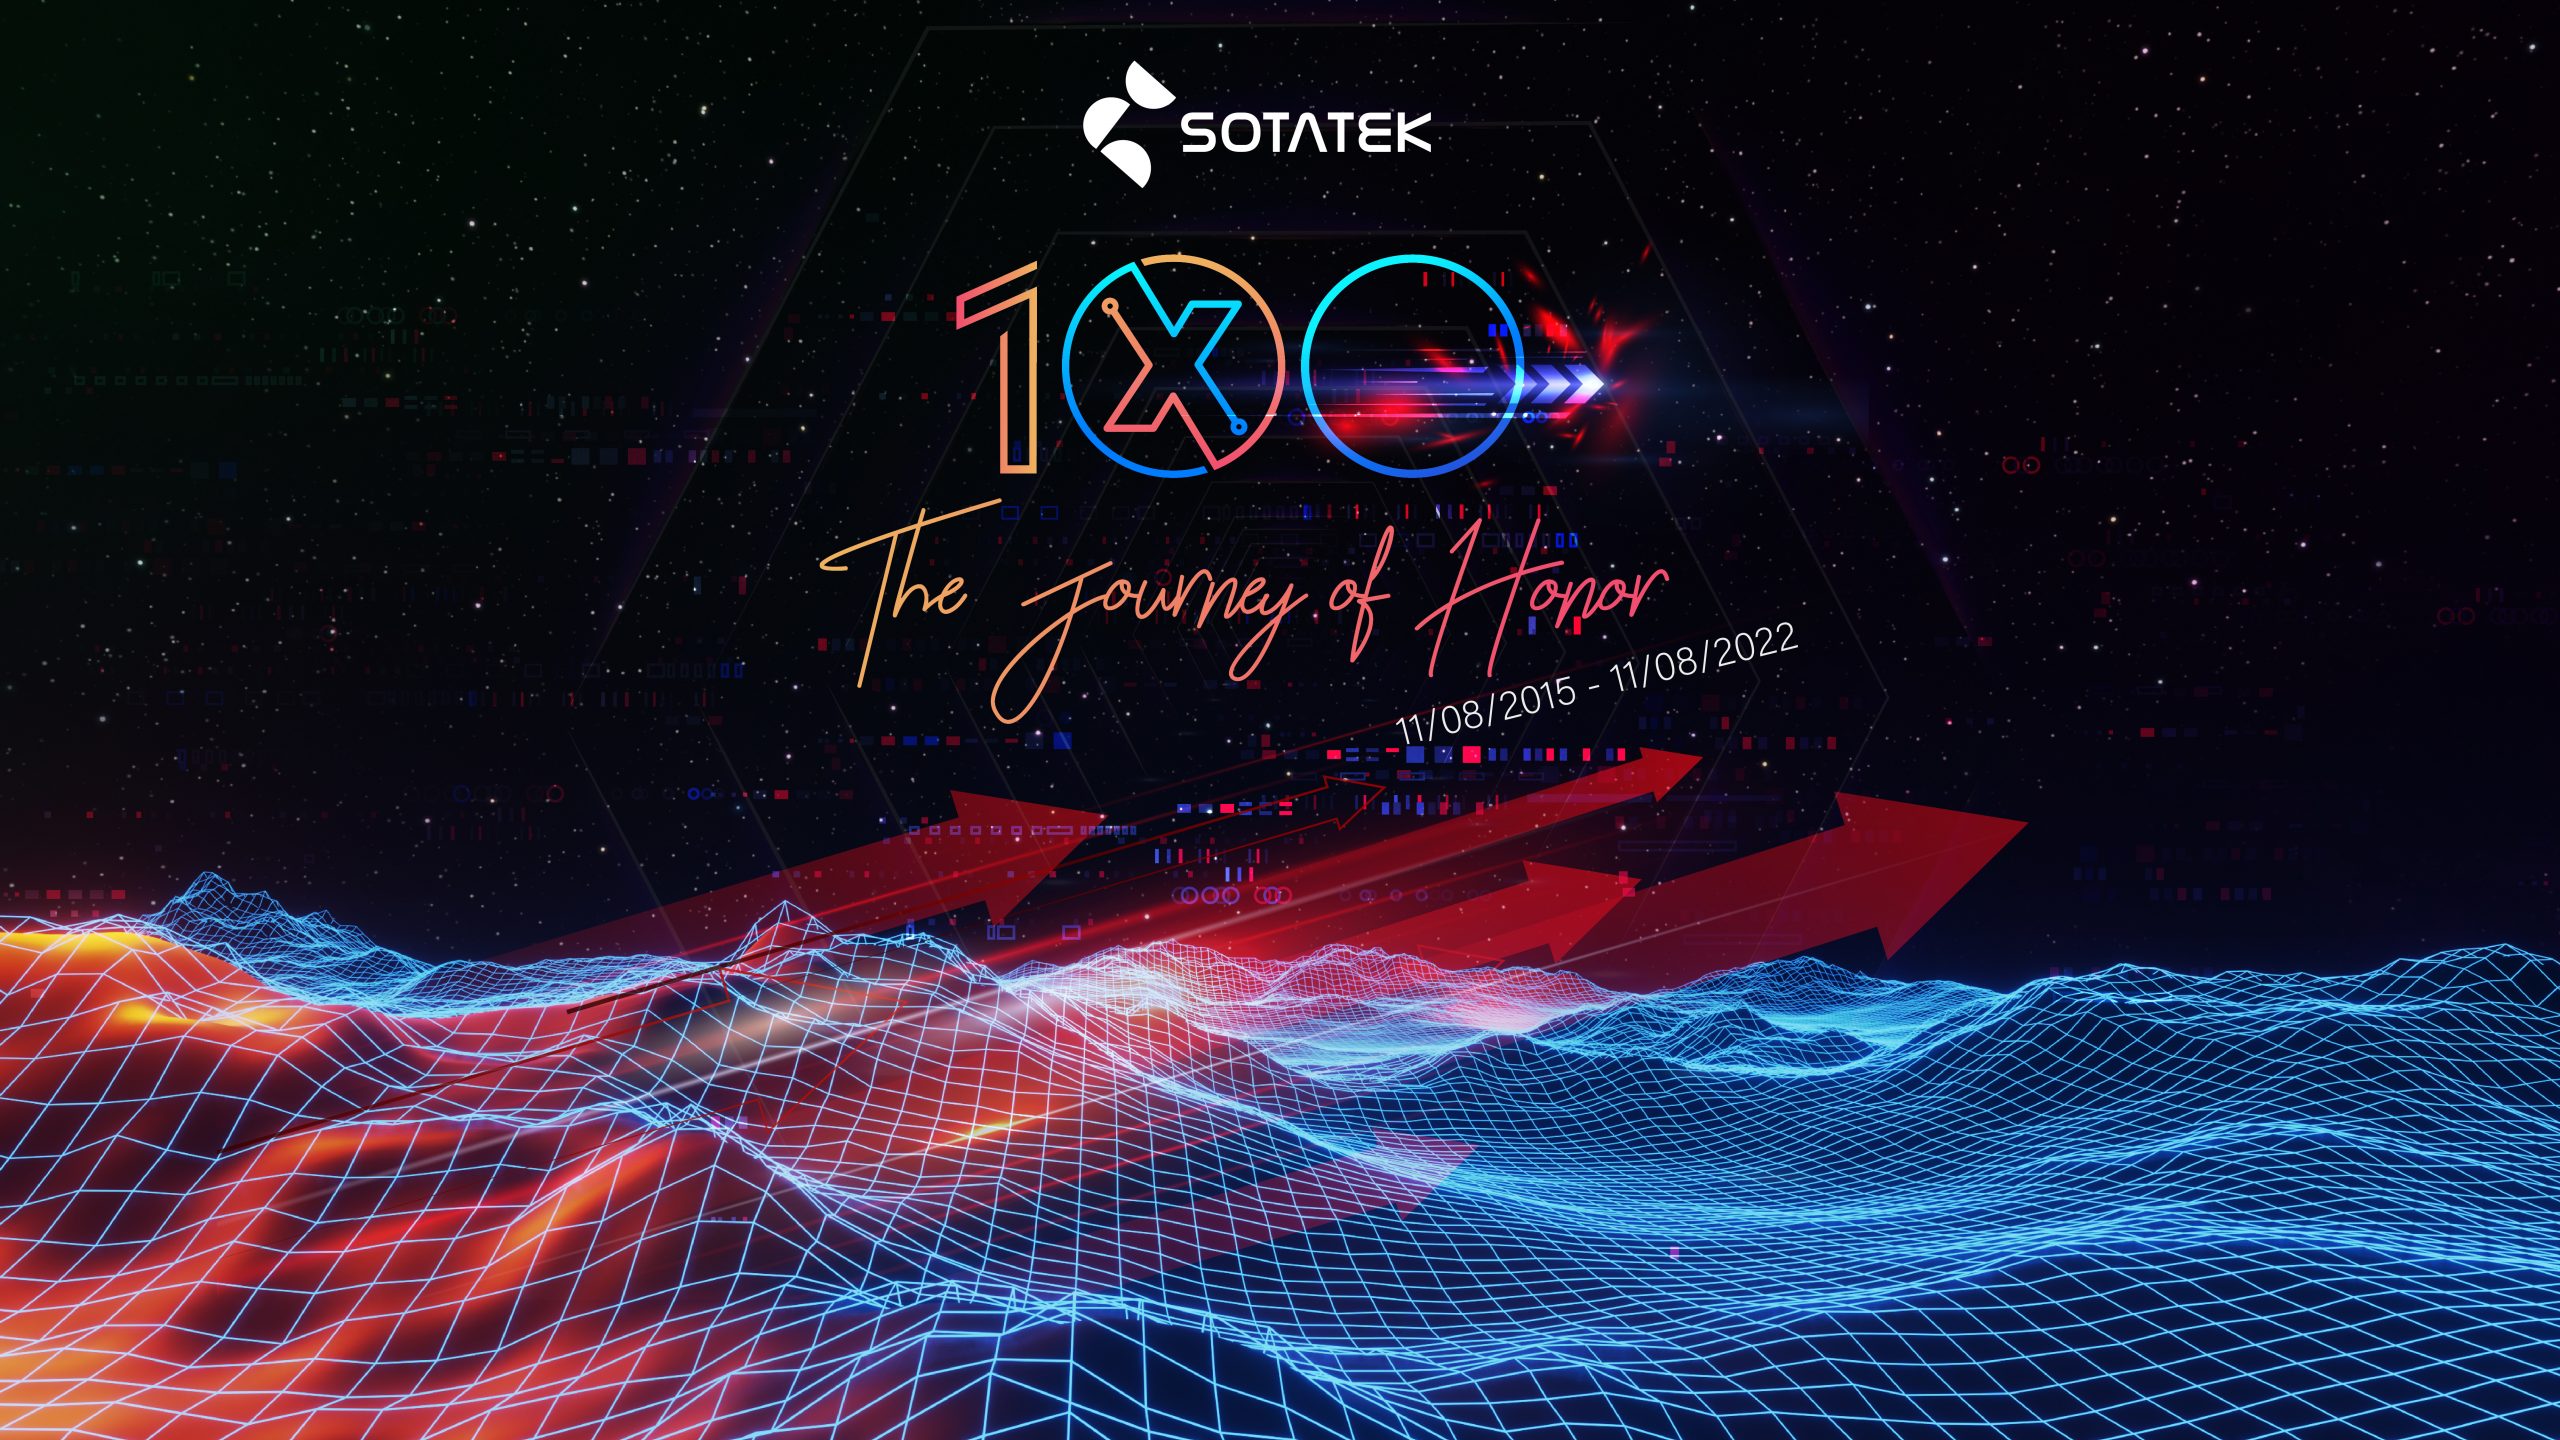 X100 - The journey of honour is theme of SotaTek's 7th anniversary